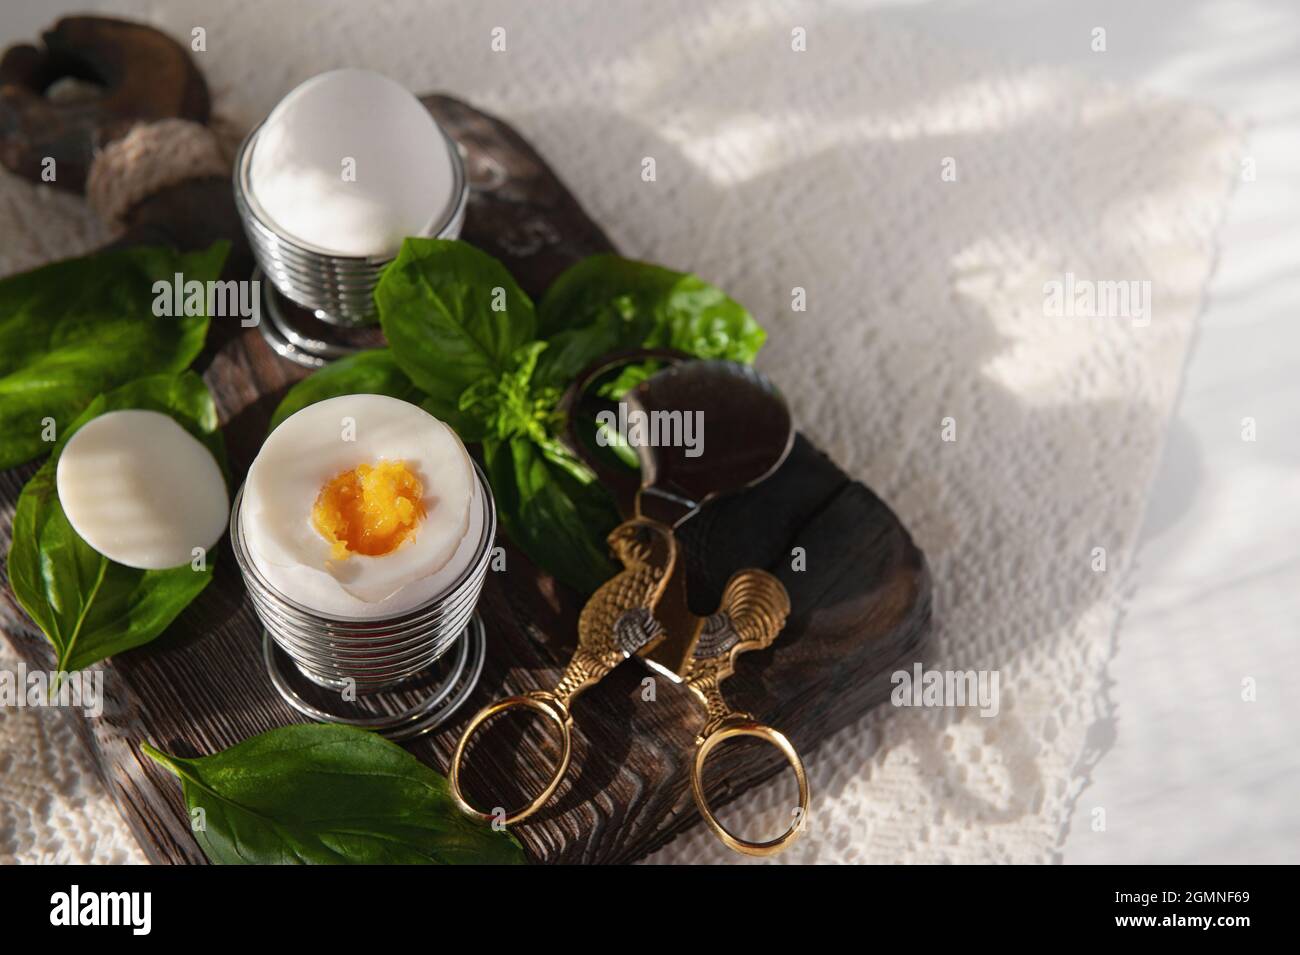 Open a soft-boiled egg in an egg cup. Homemade low-calorie breakfast on a rustic table. copy space. Stock Photo